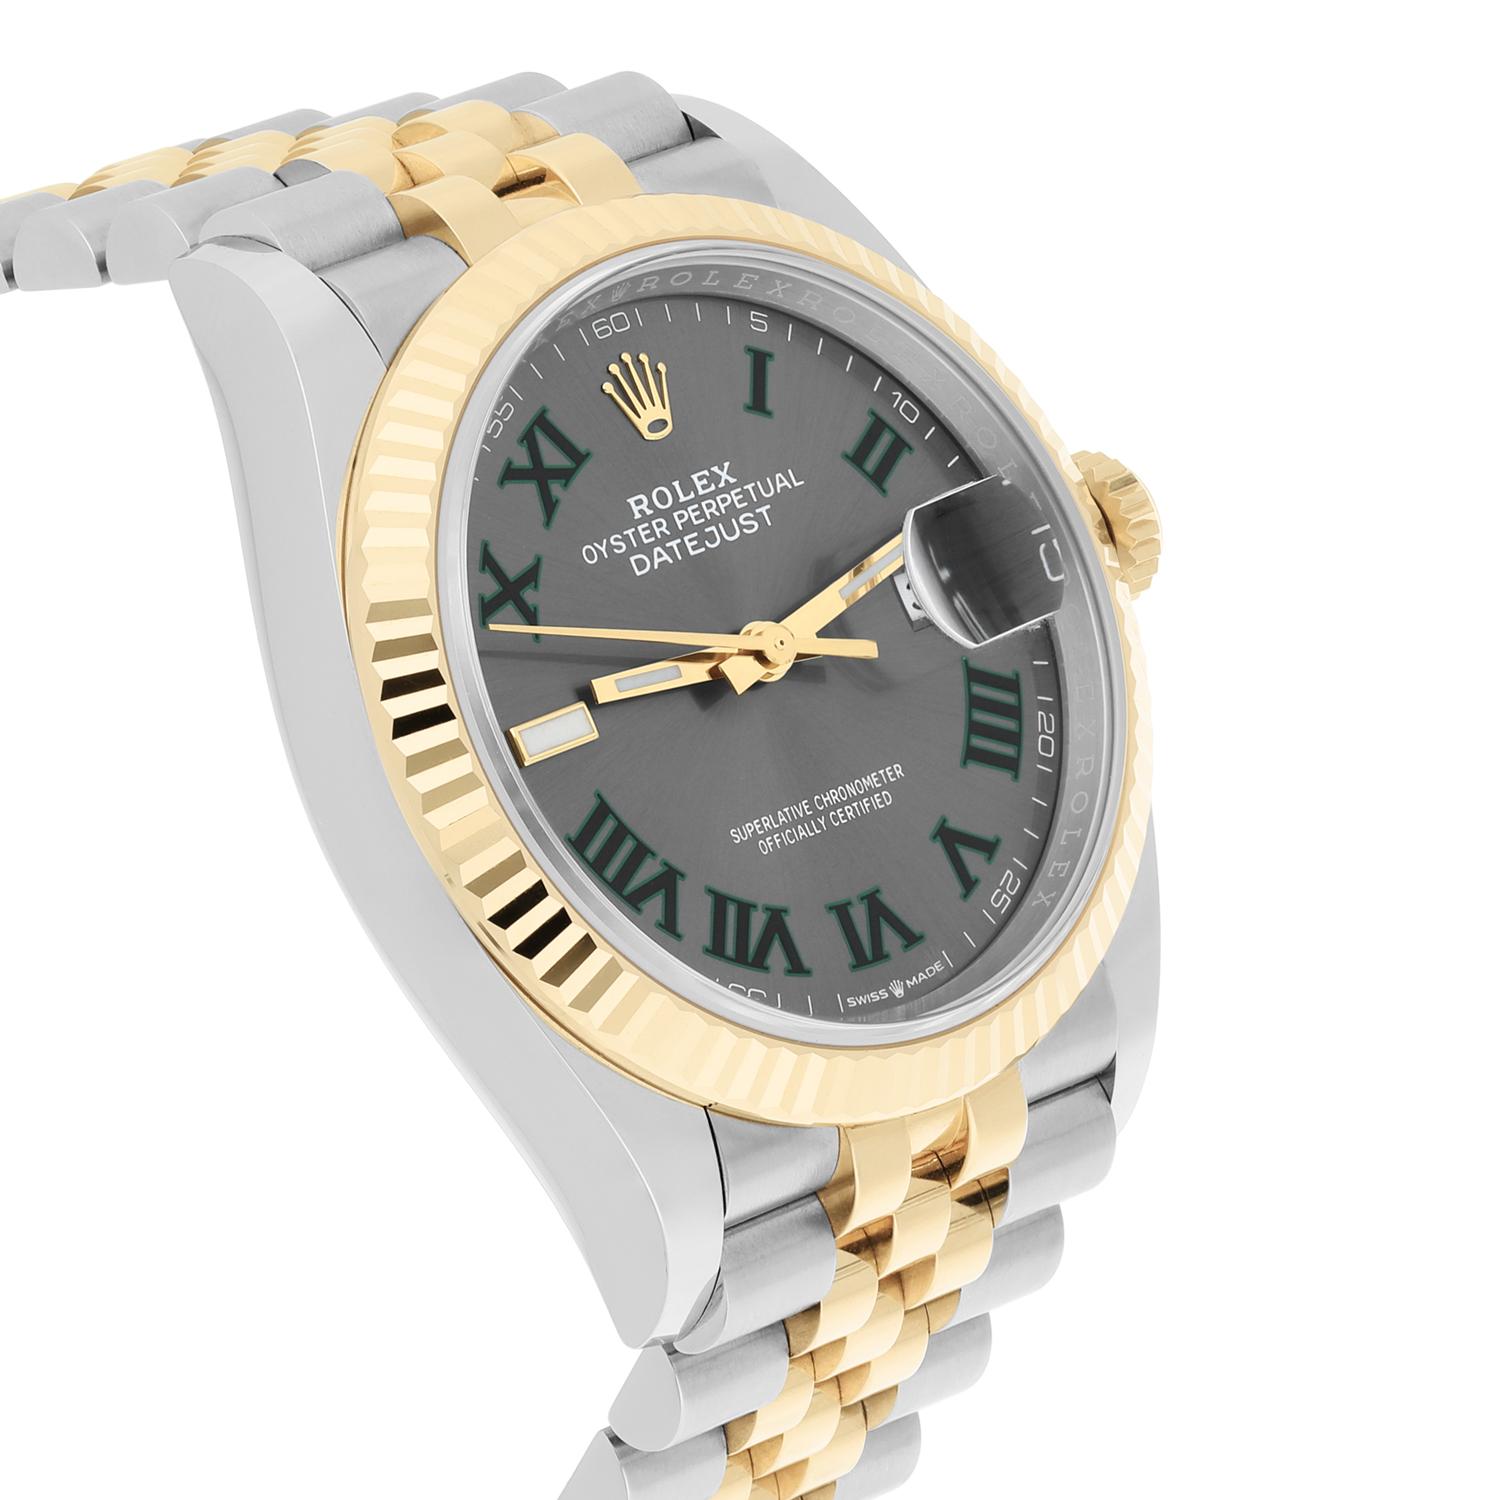 Women's or Men's Rolex 126233 Datejust 36mm Two-Tone Yellow Gold Fluted Bezel Wimbledon Dial B/P For Sale